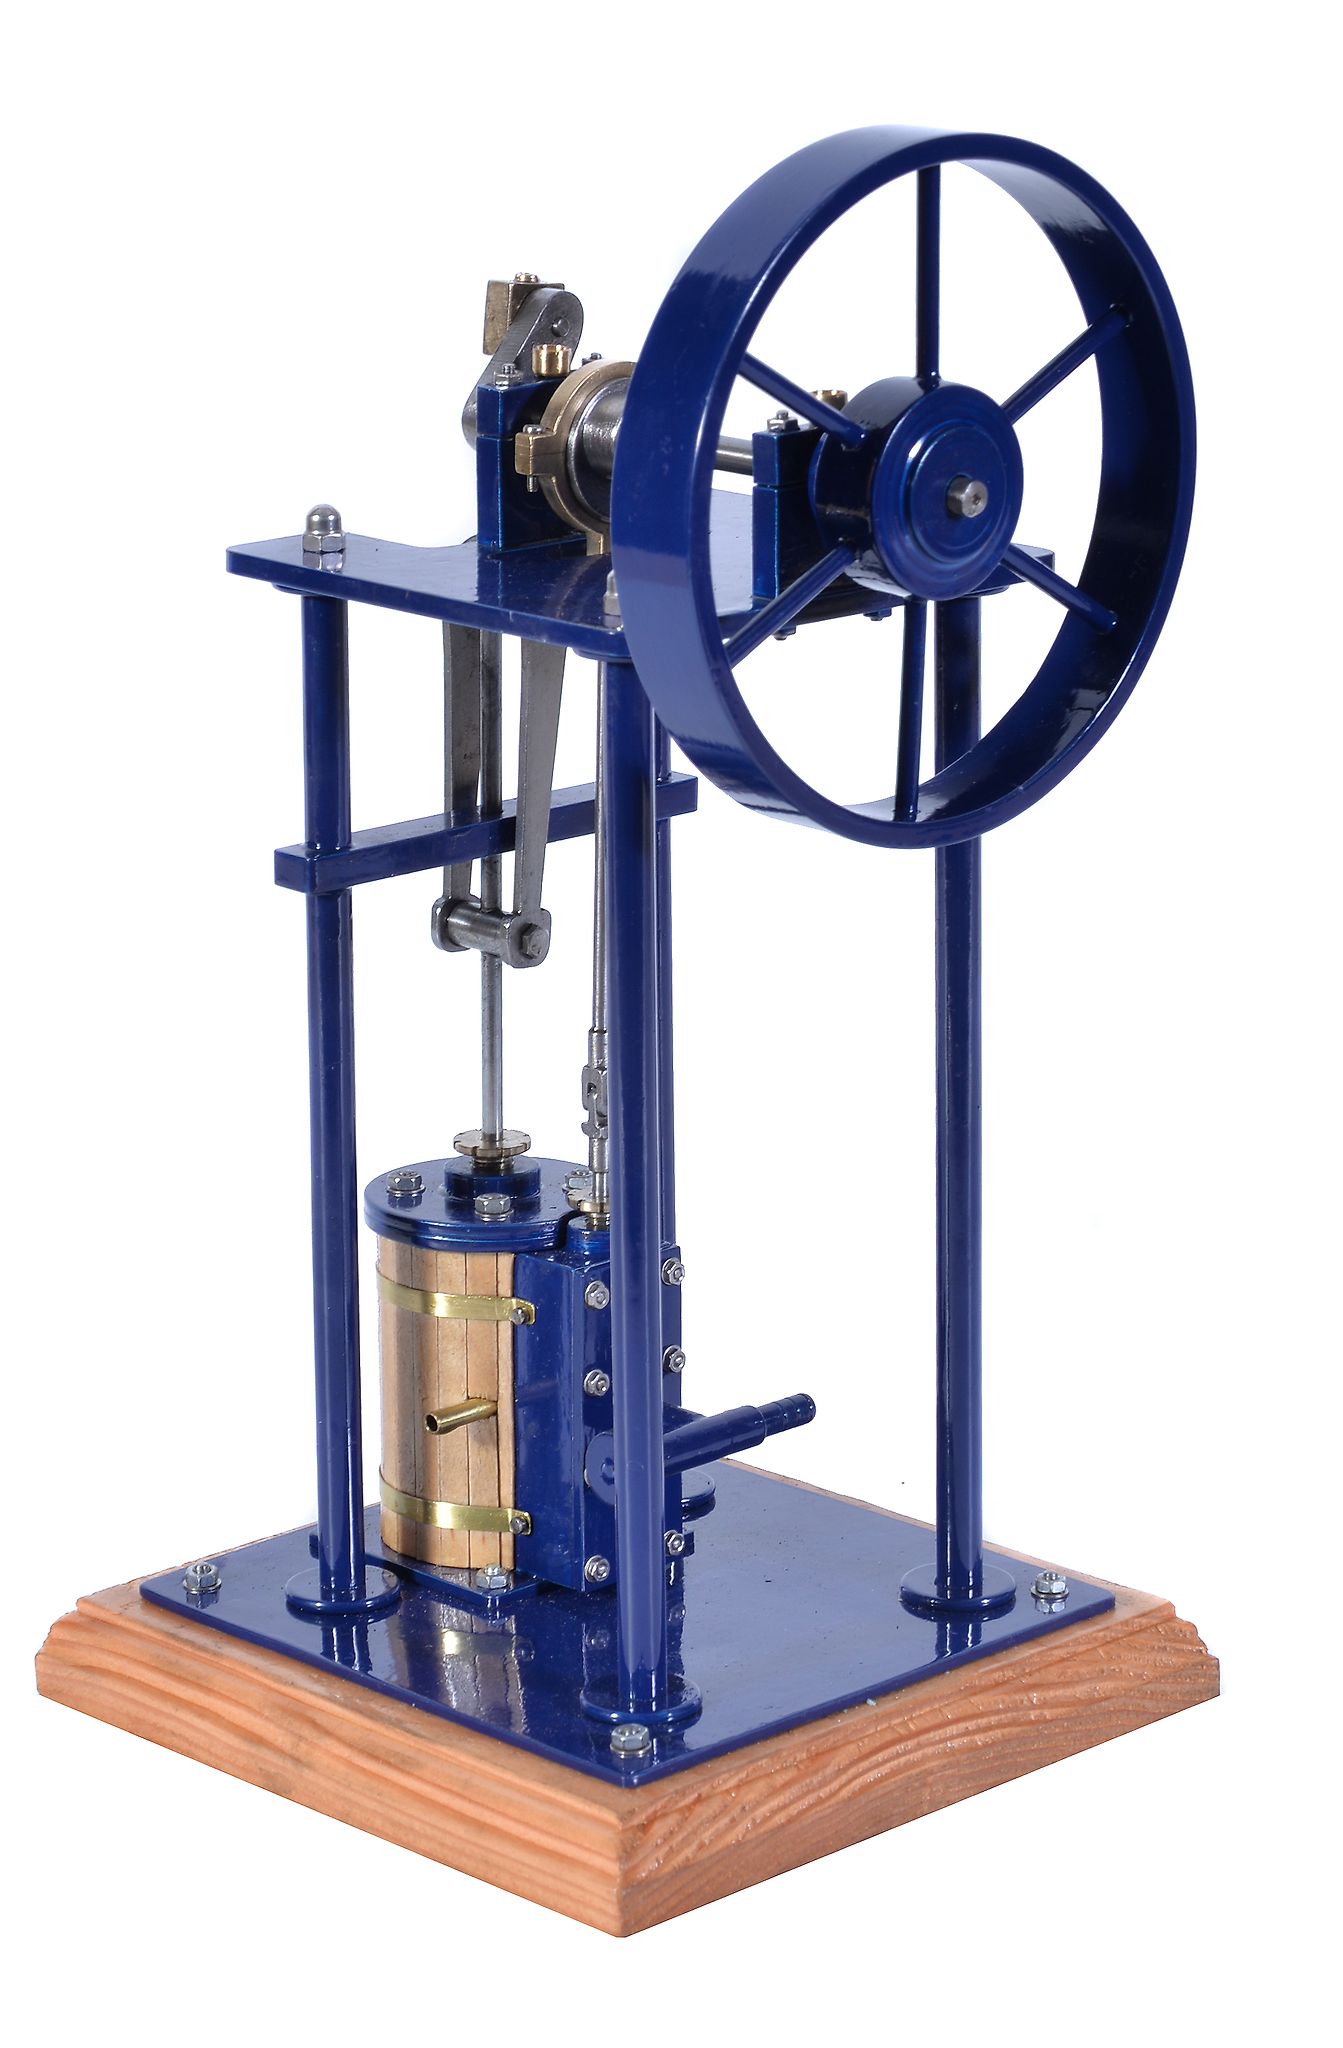 A well-engineered model of an over-type vertical live steam engine, built by Mr D. Russell of - Image 2 of 3